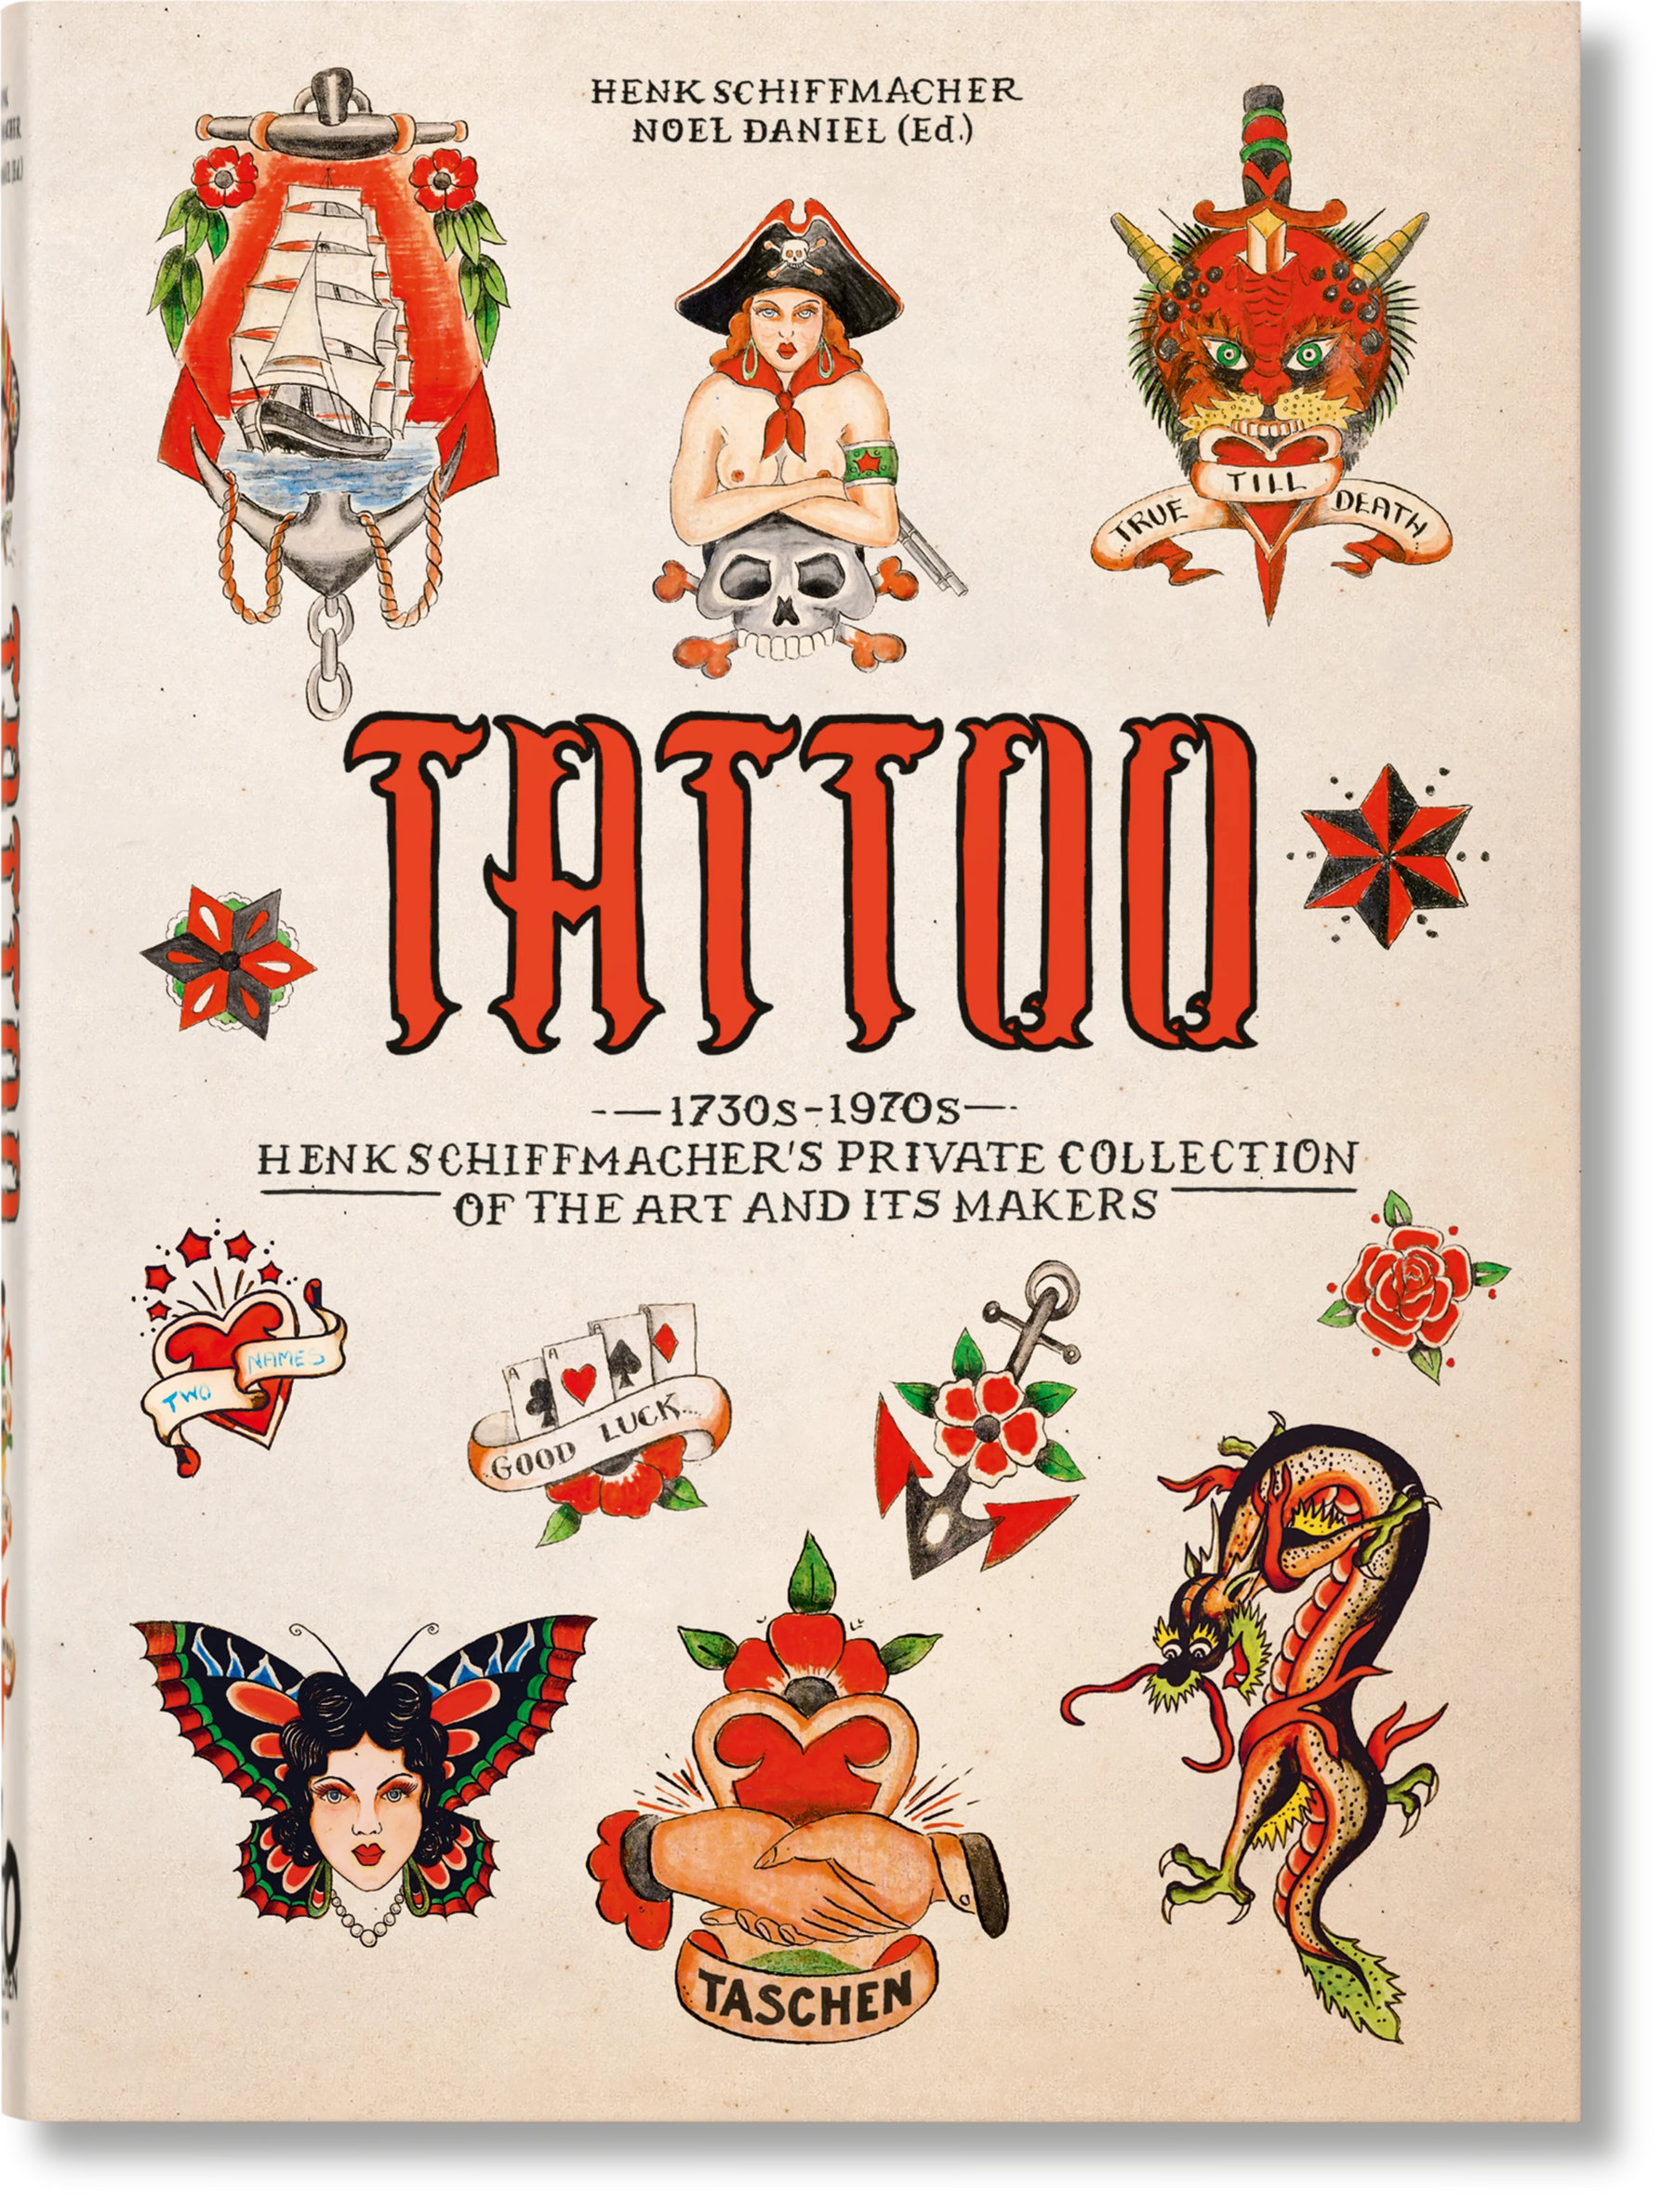 Tattoo. 1730's-1970's. Henk Schiffman's Private Collection, 40th Edition